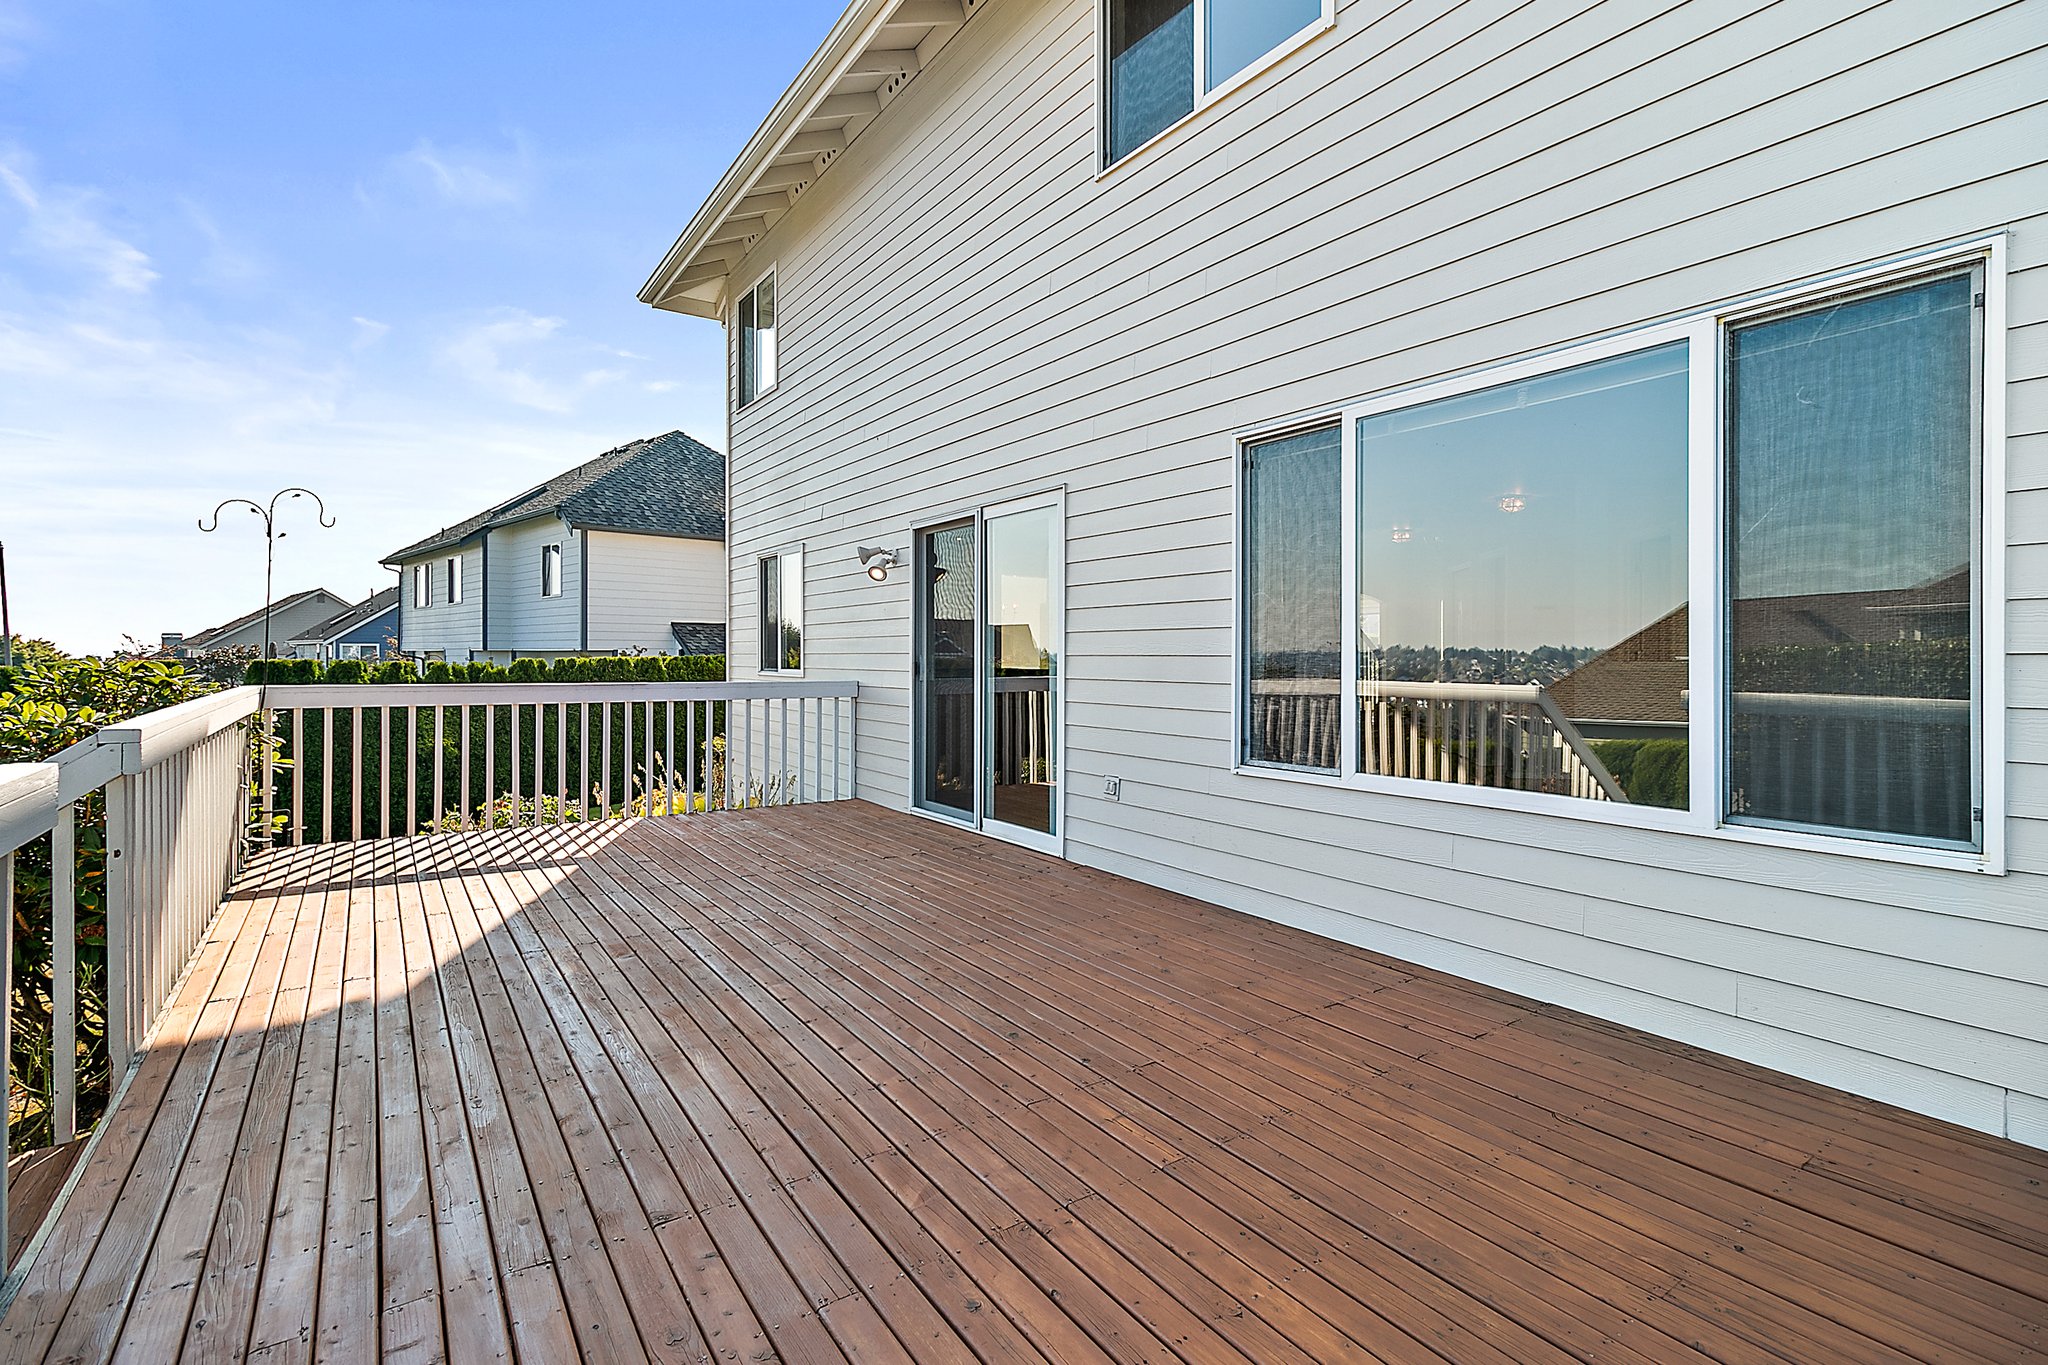 Great entertain or unwinding space on this deck.